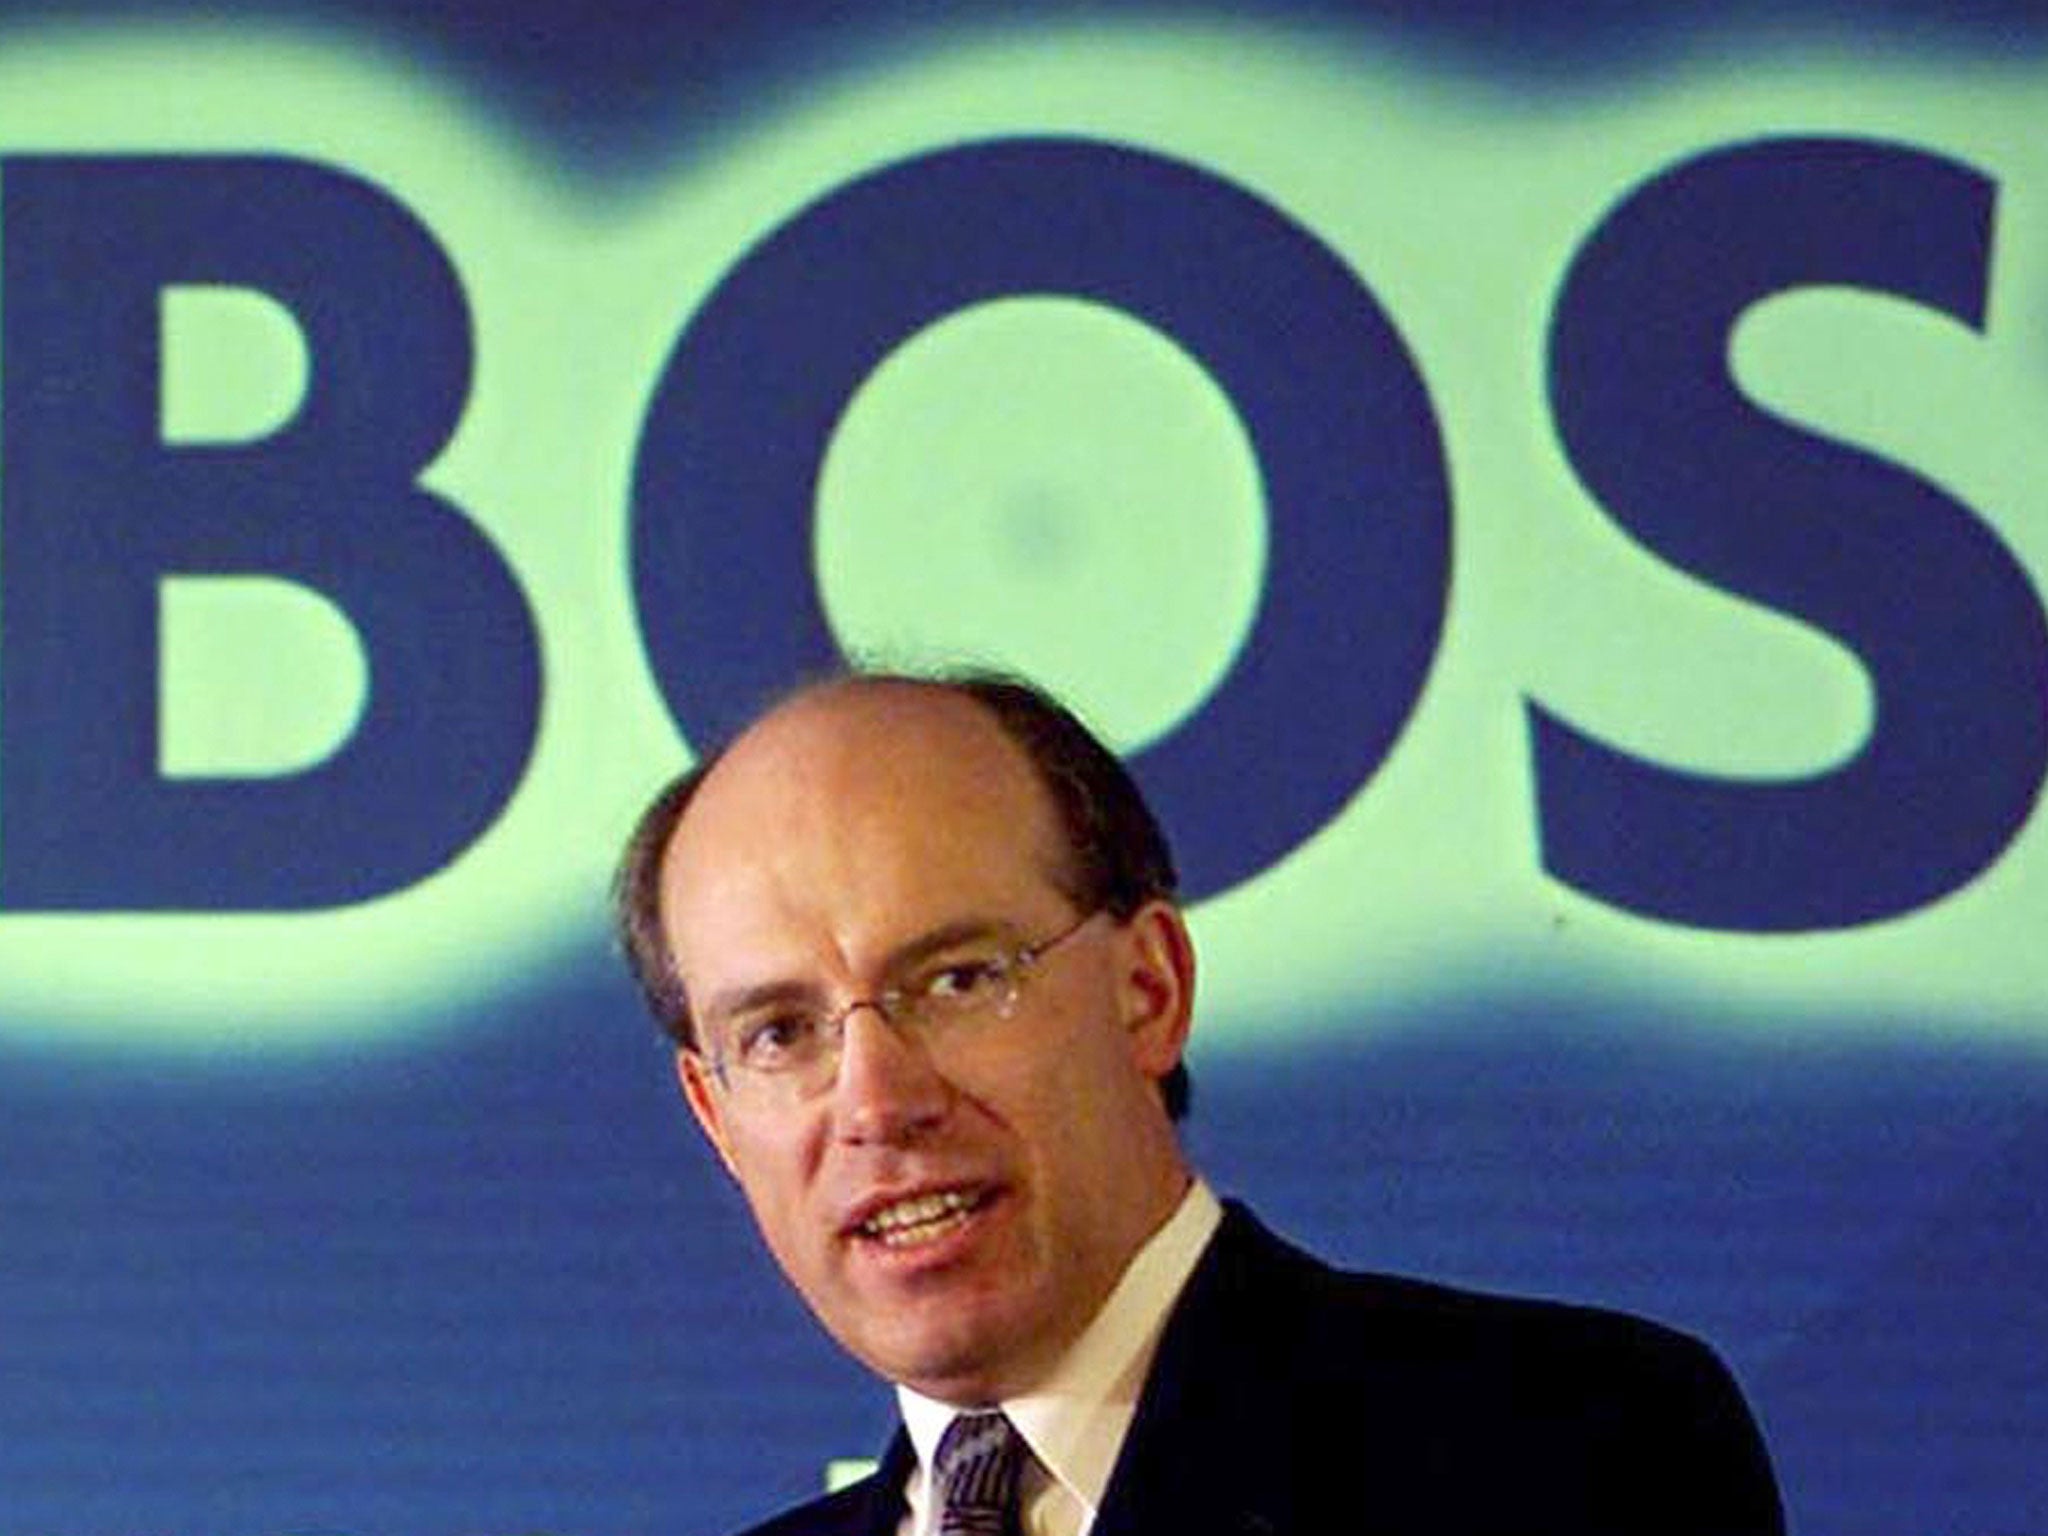 James Crosby, the former chief executive of HBOS